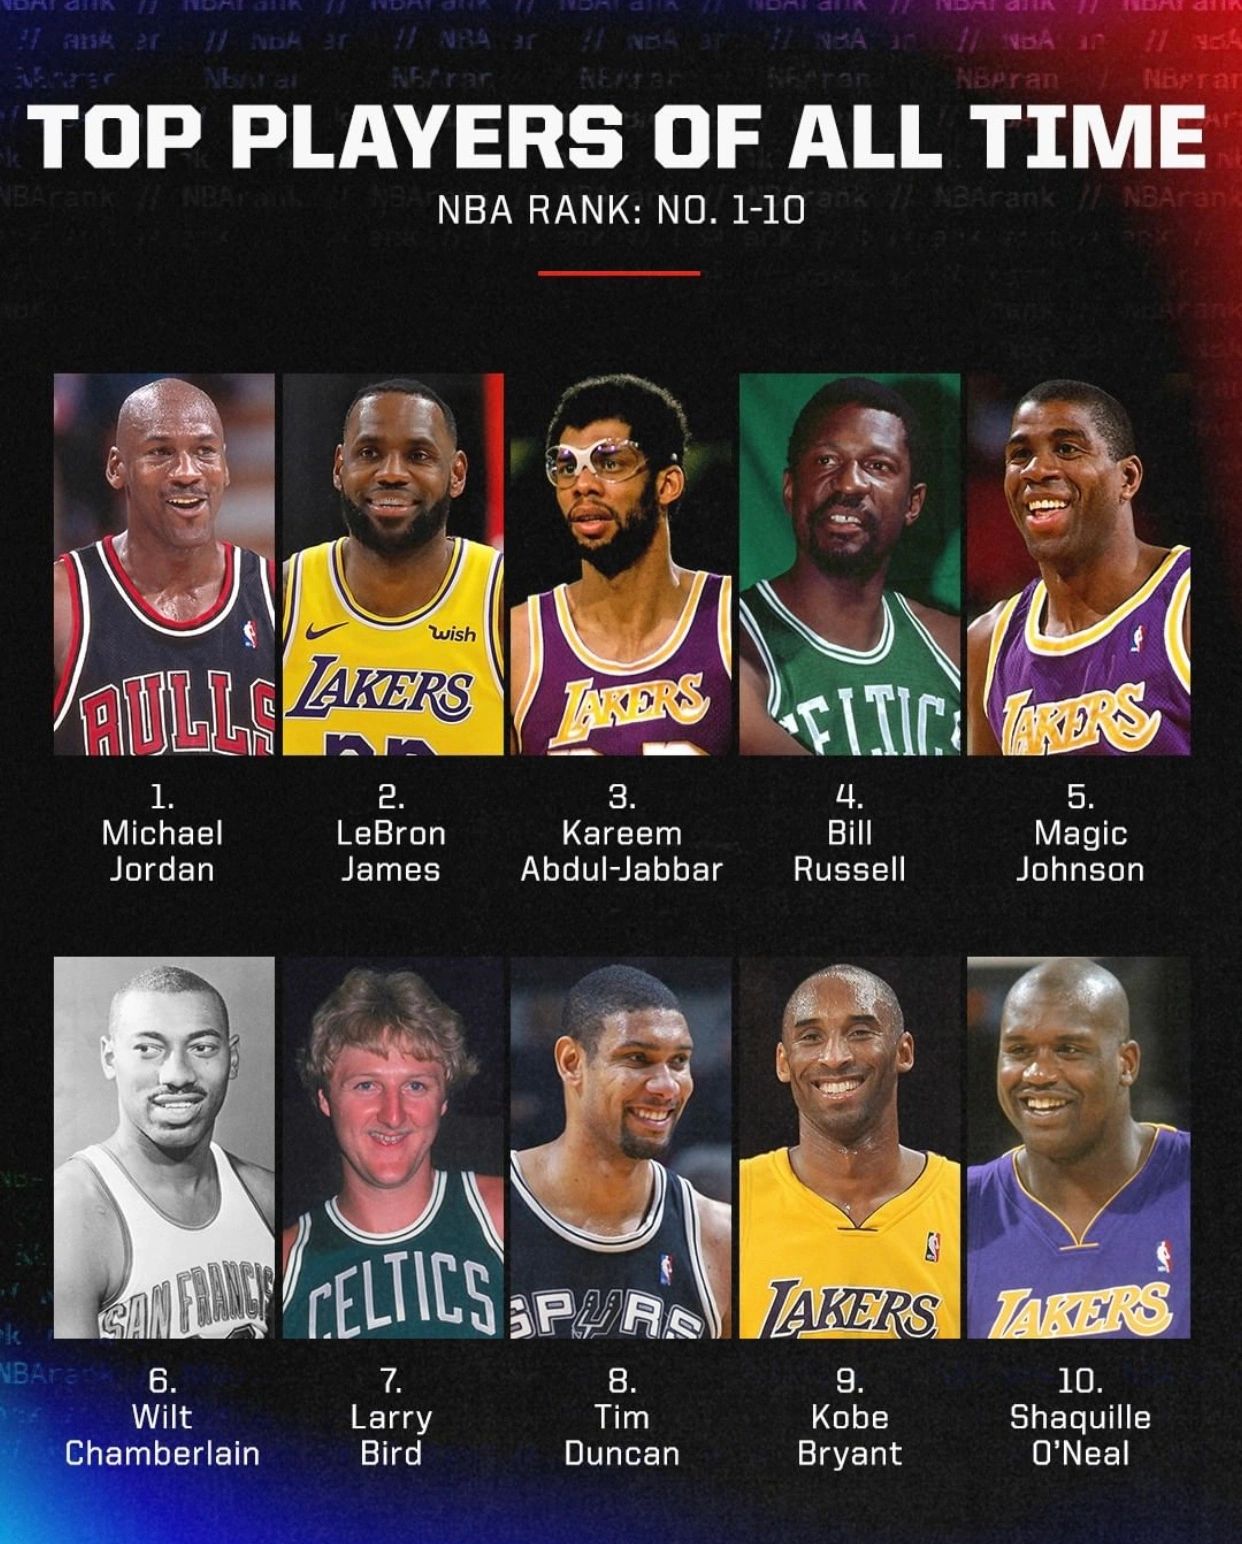 ESPN’s Top 10 NBA Players of All Time Ranking